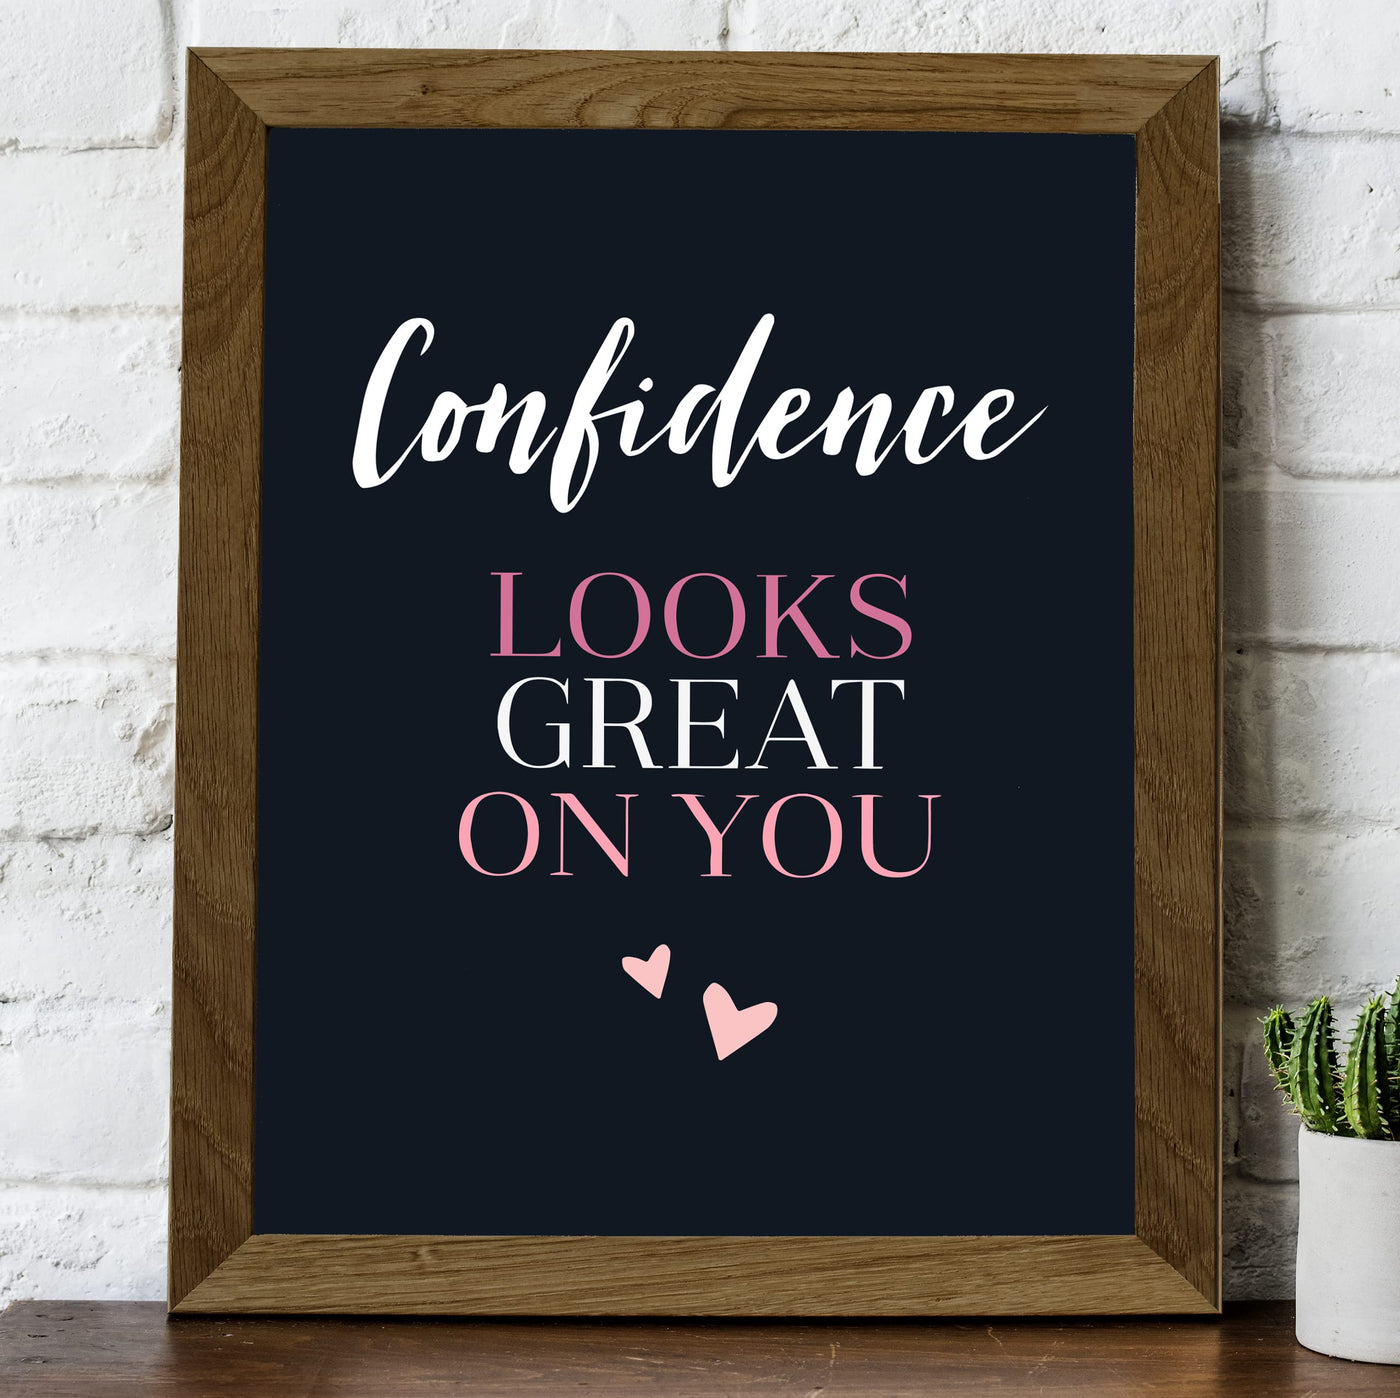 Confidence Looks Great on You Inspirational Quotes Art Print -8 x 10" Modern Typographic Wall Decor-Ready to Frame. Great Motivational Decoration. Perfect Gift to Empower Women & Teen Girls!